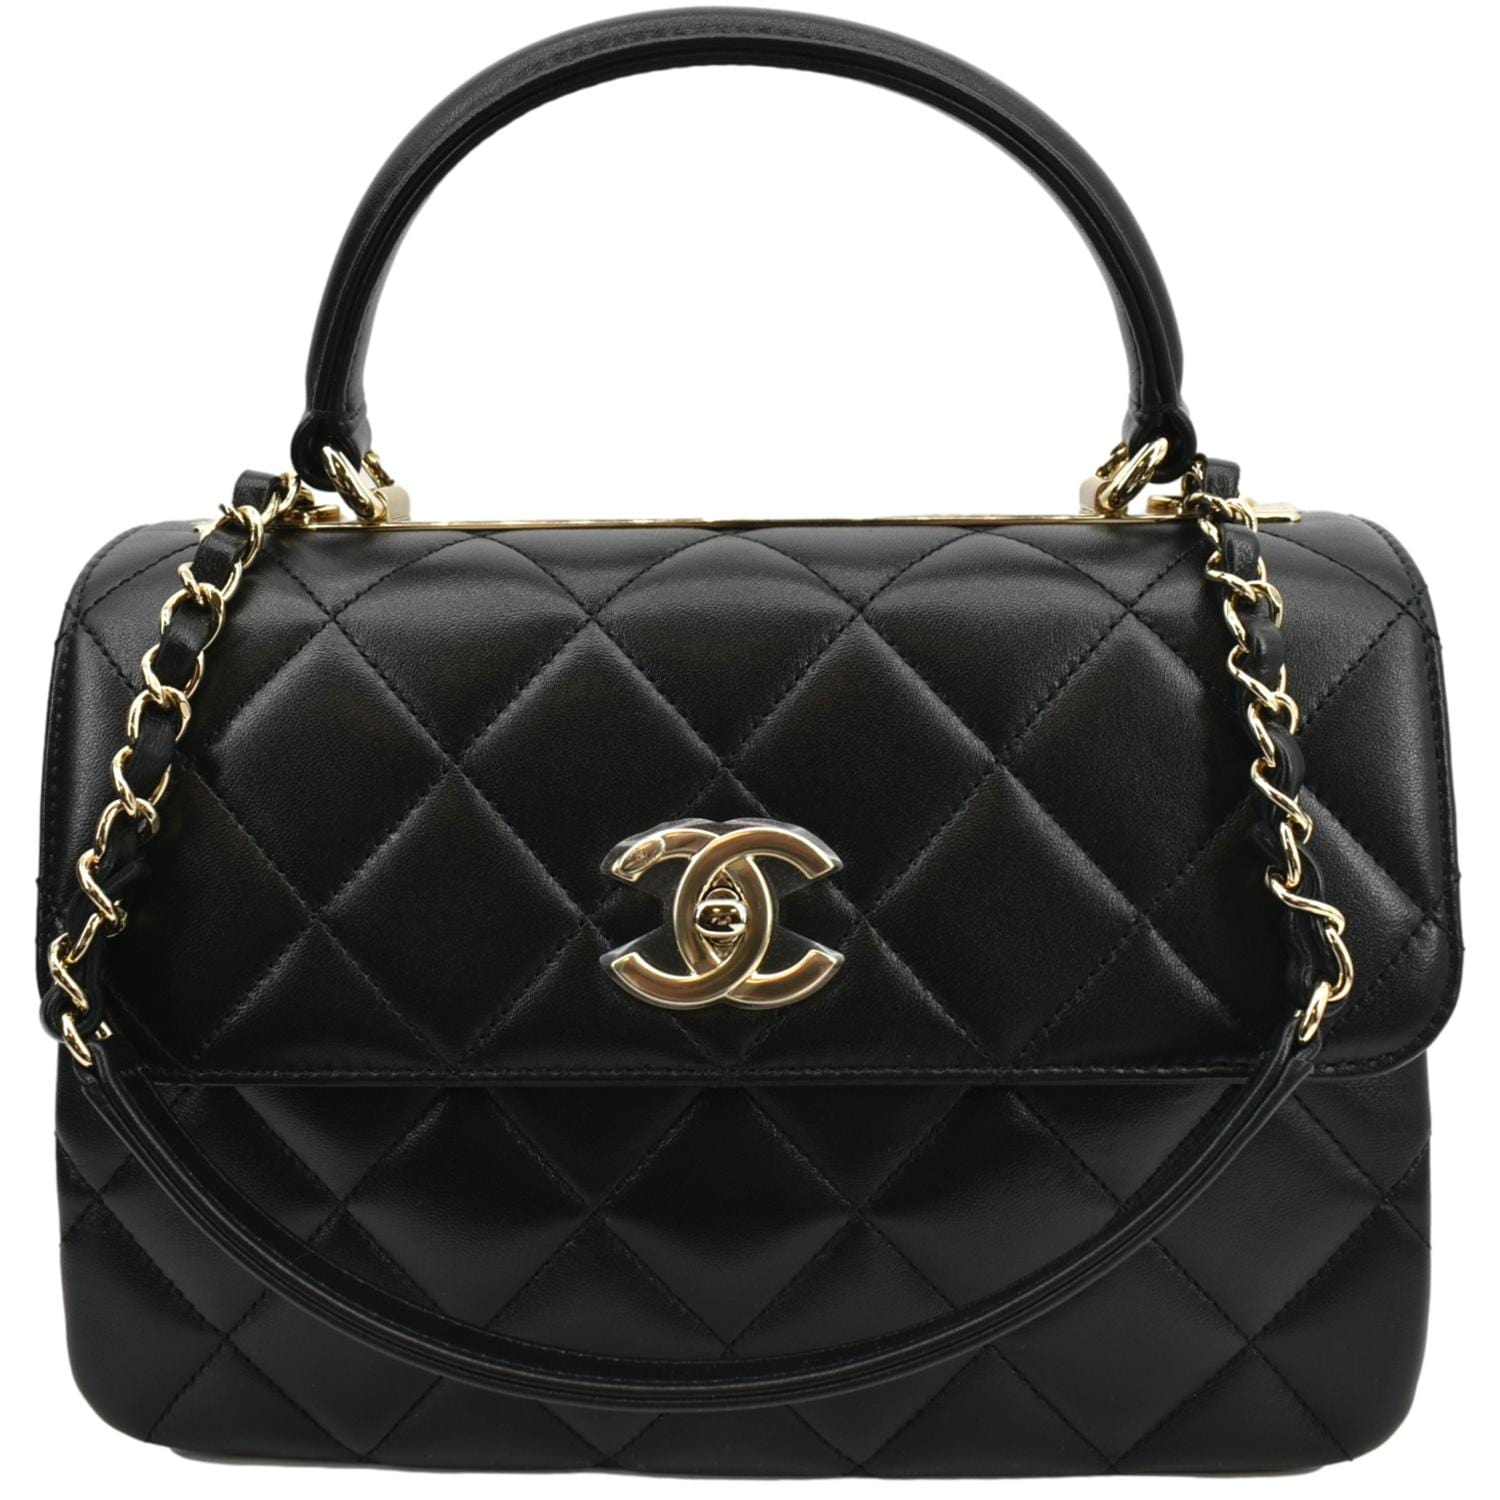 Chanel Lambskin Quilted Large Trendy CC Dual Handle Flap Bag Black